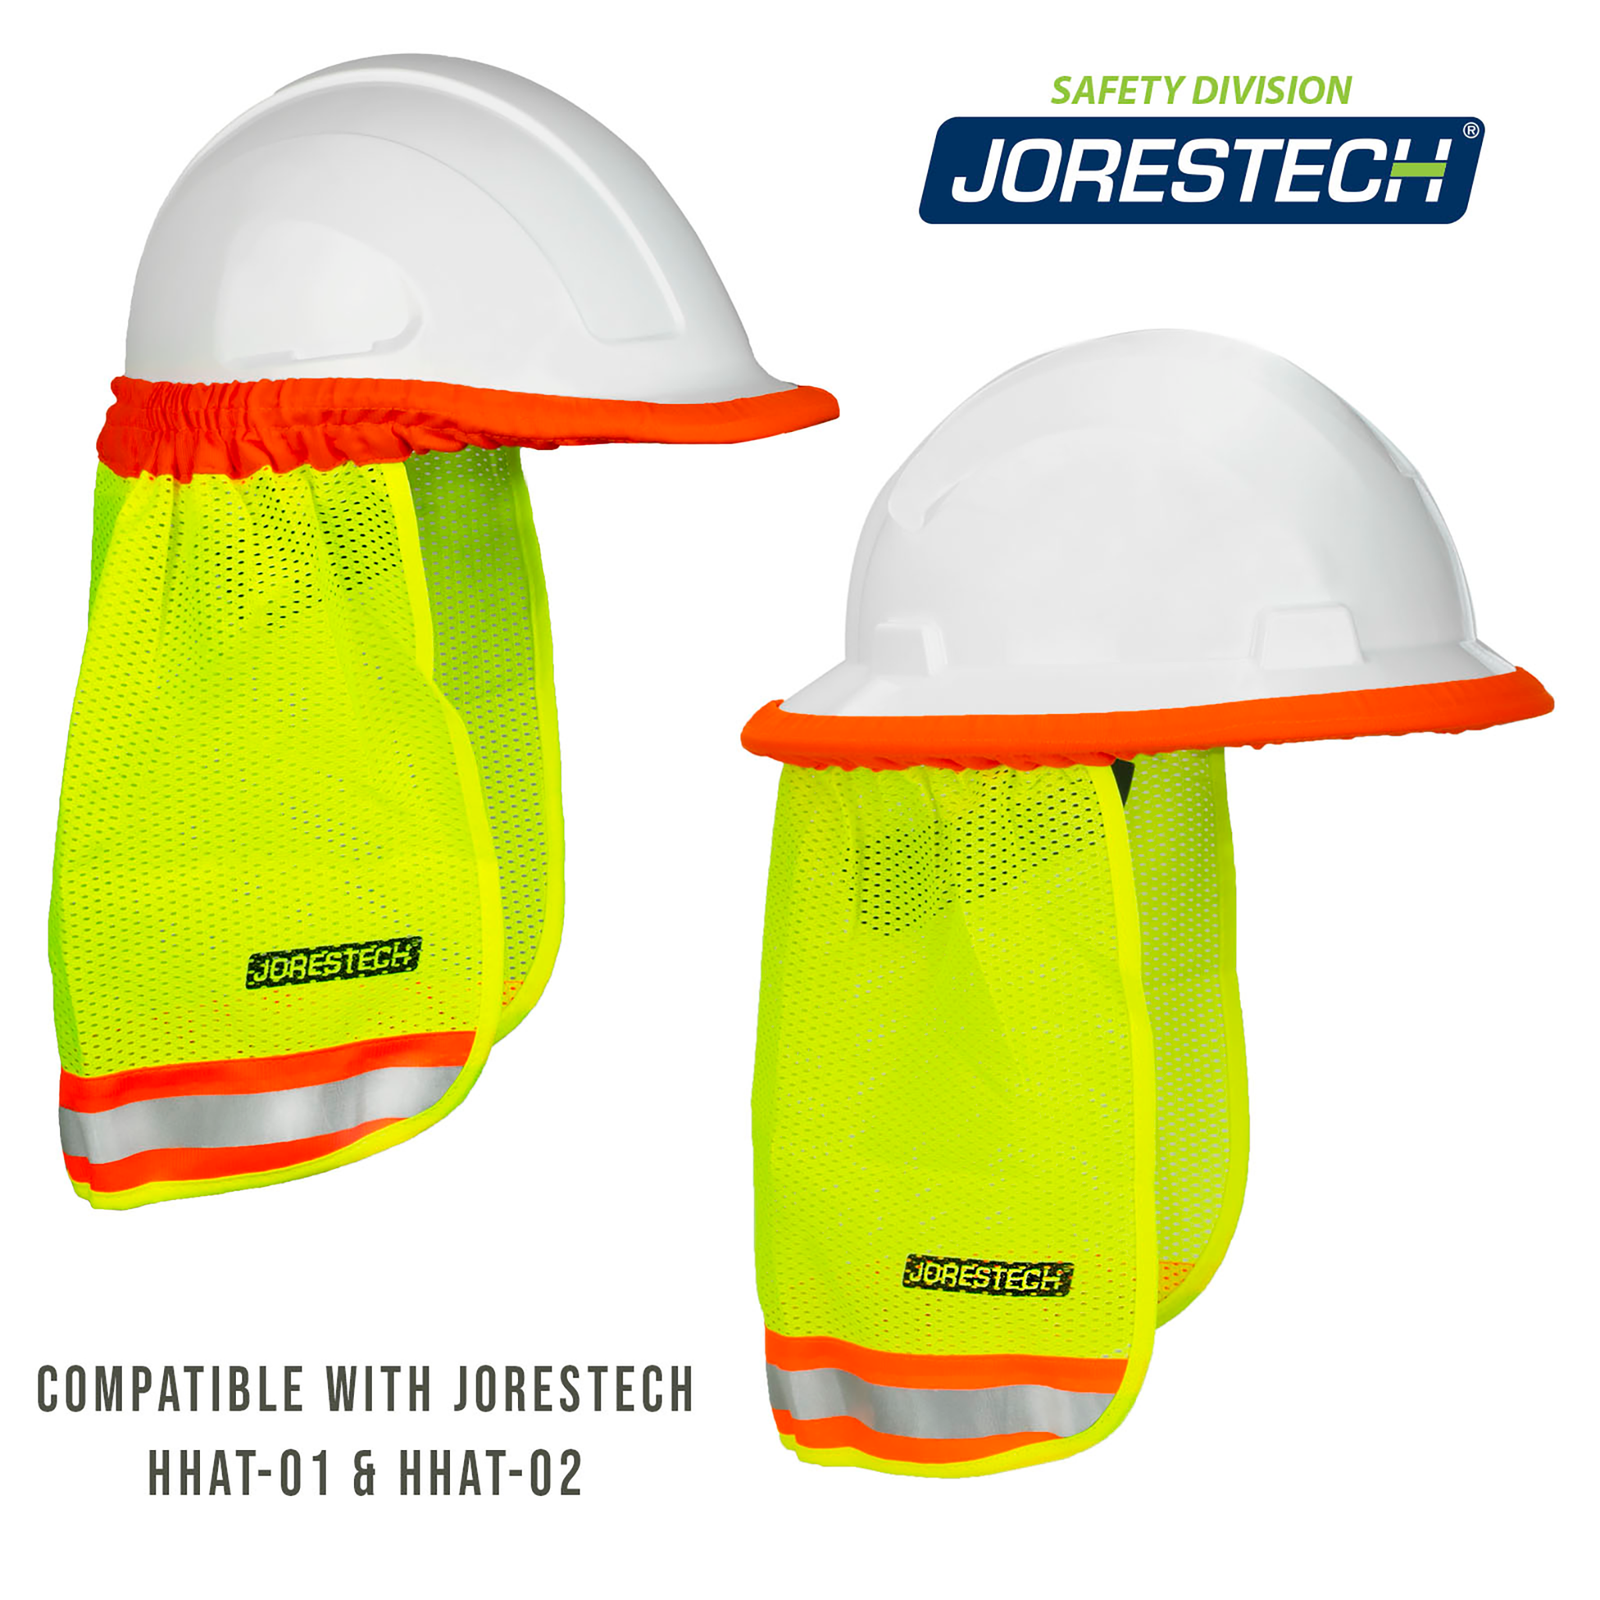 Shows 2 hart hats with a hi-visibility 2 tone hard hat neck shade. One is installed in a full brim hard hat and the other one is installed in a cap stile white hard hat. Text reads: compatible with JORESTCH HHAT-01 & HHAT-02